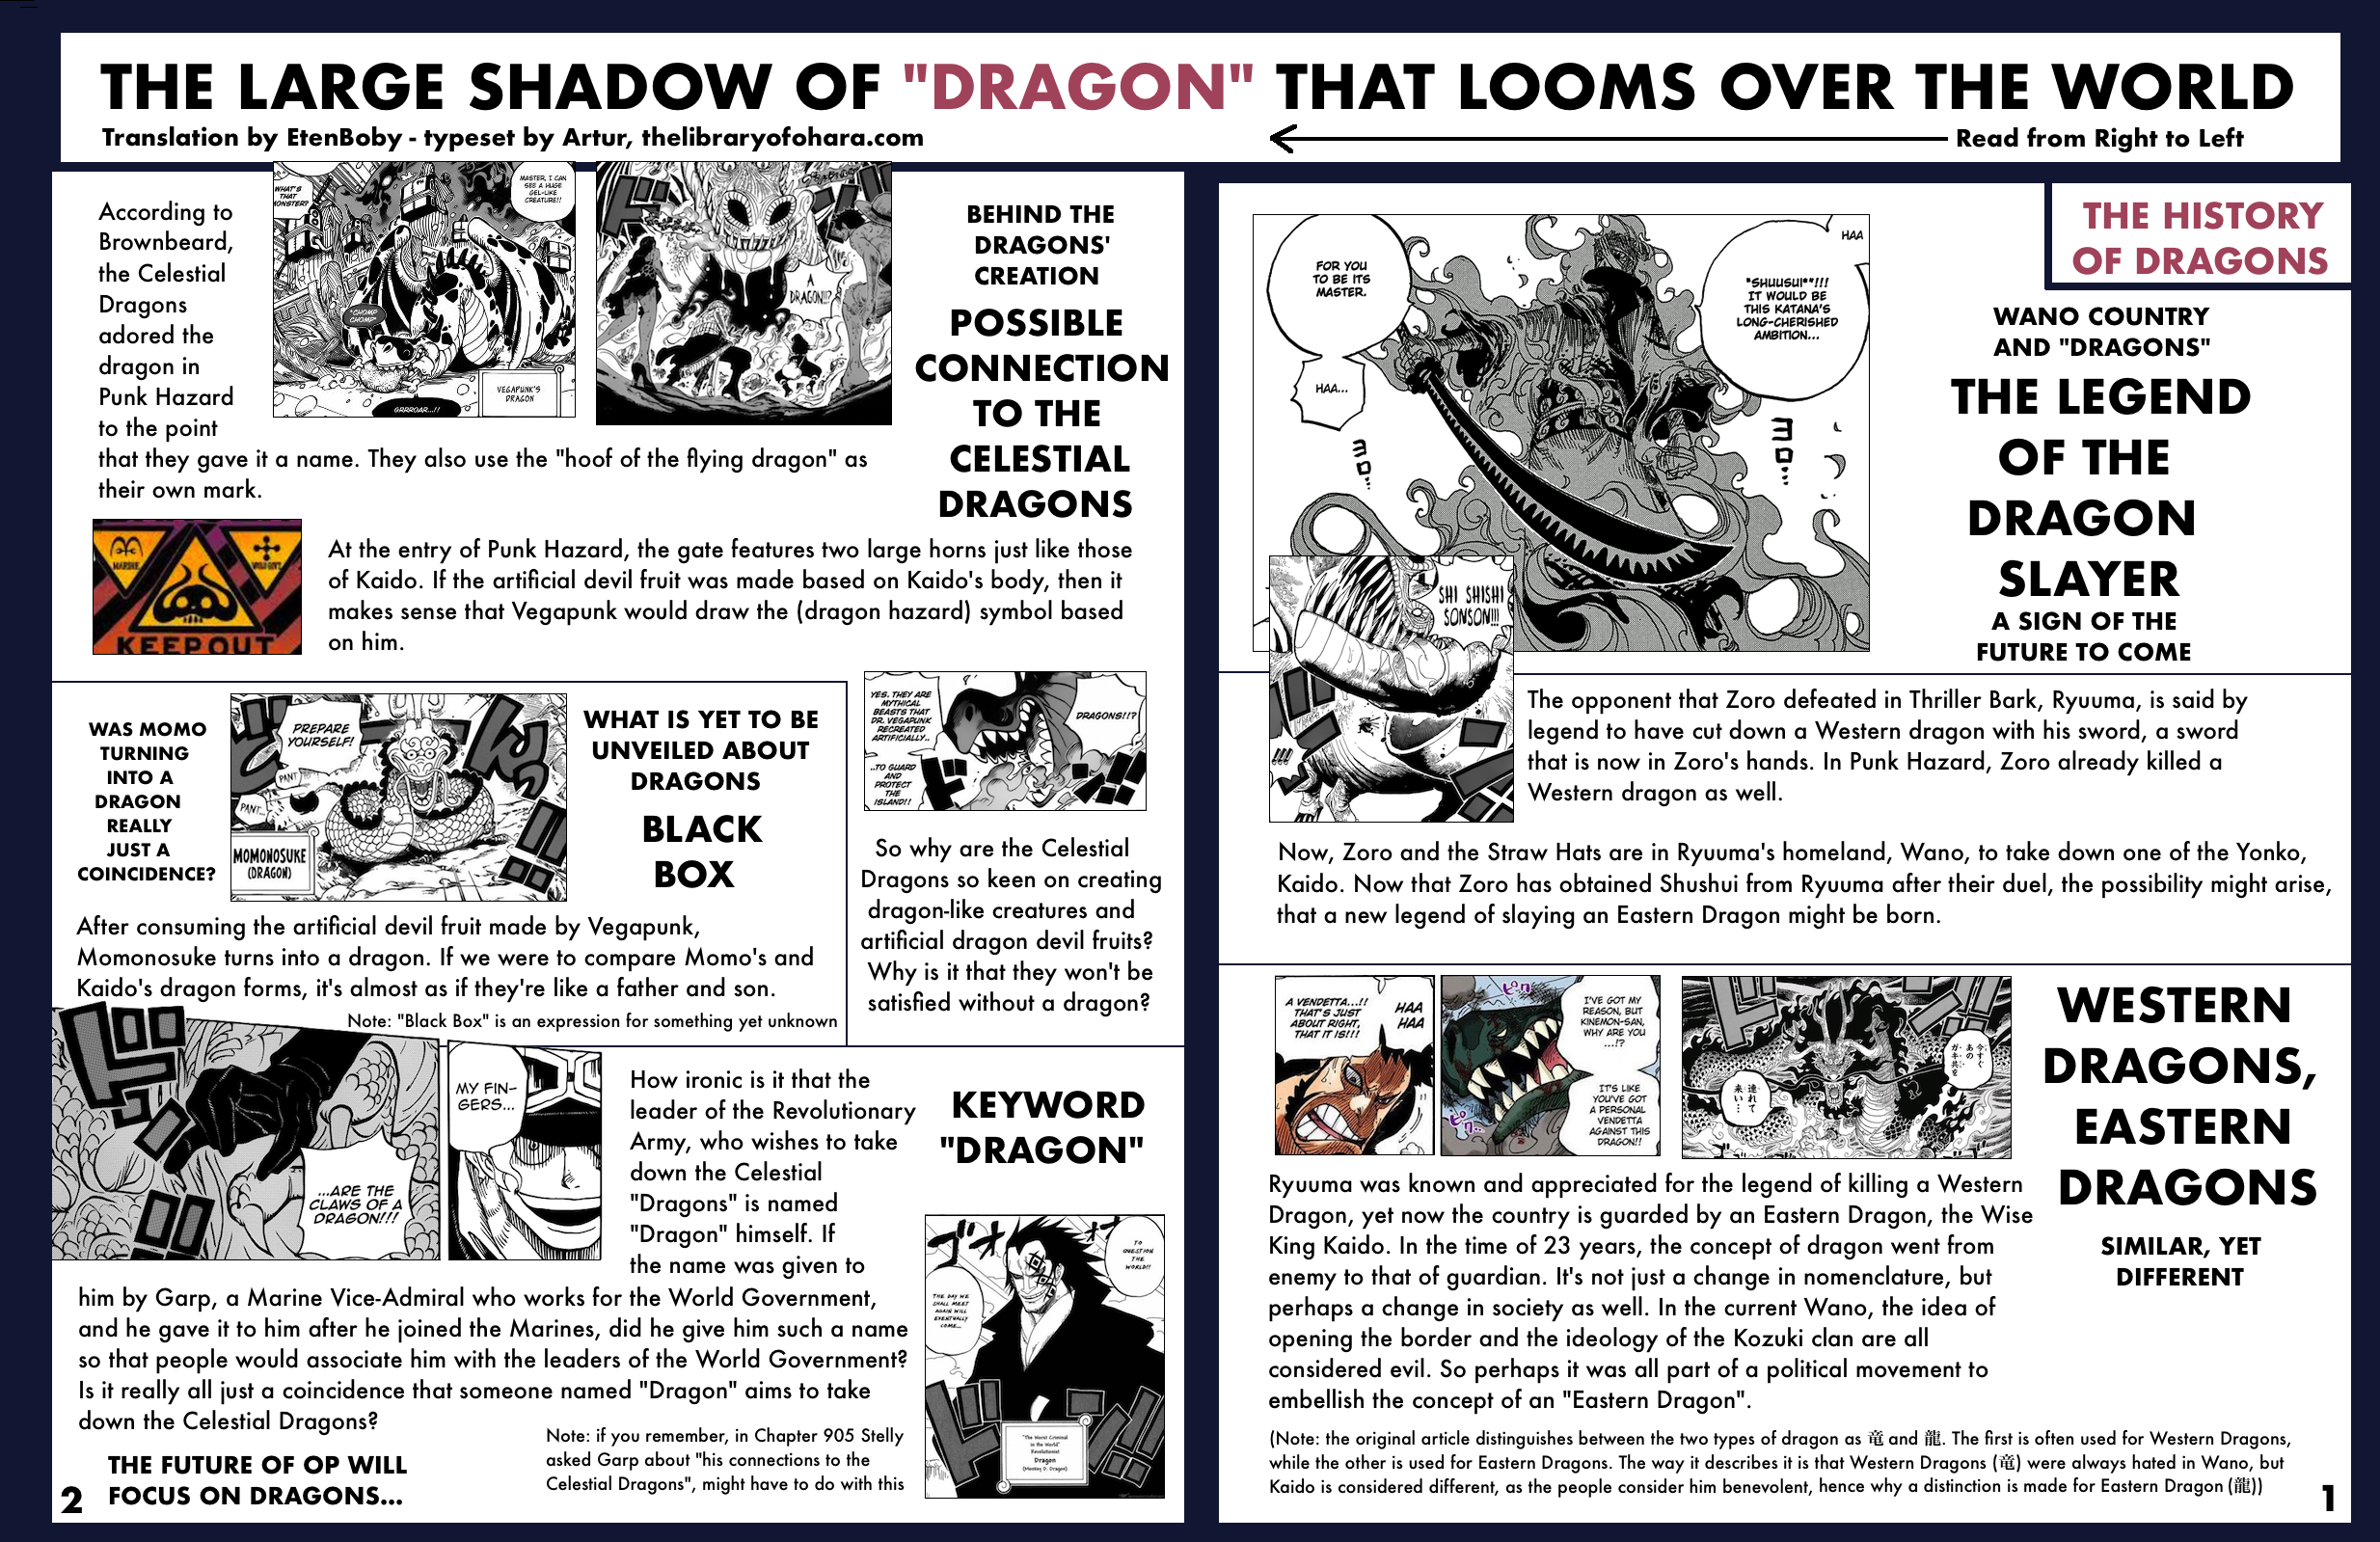 New Information On The Dragons Of One Piece Magazine Vol 5 The Library Of Ohara